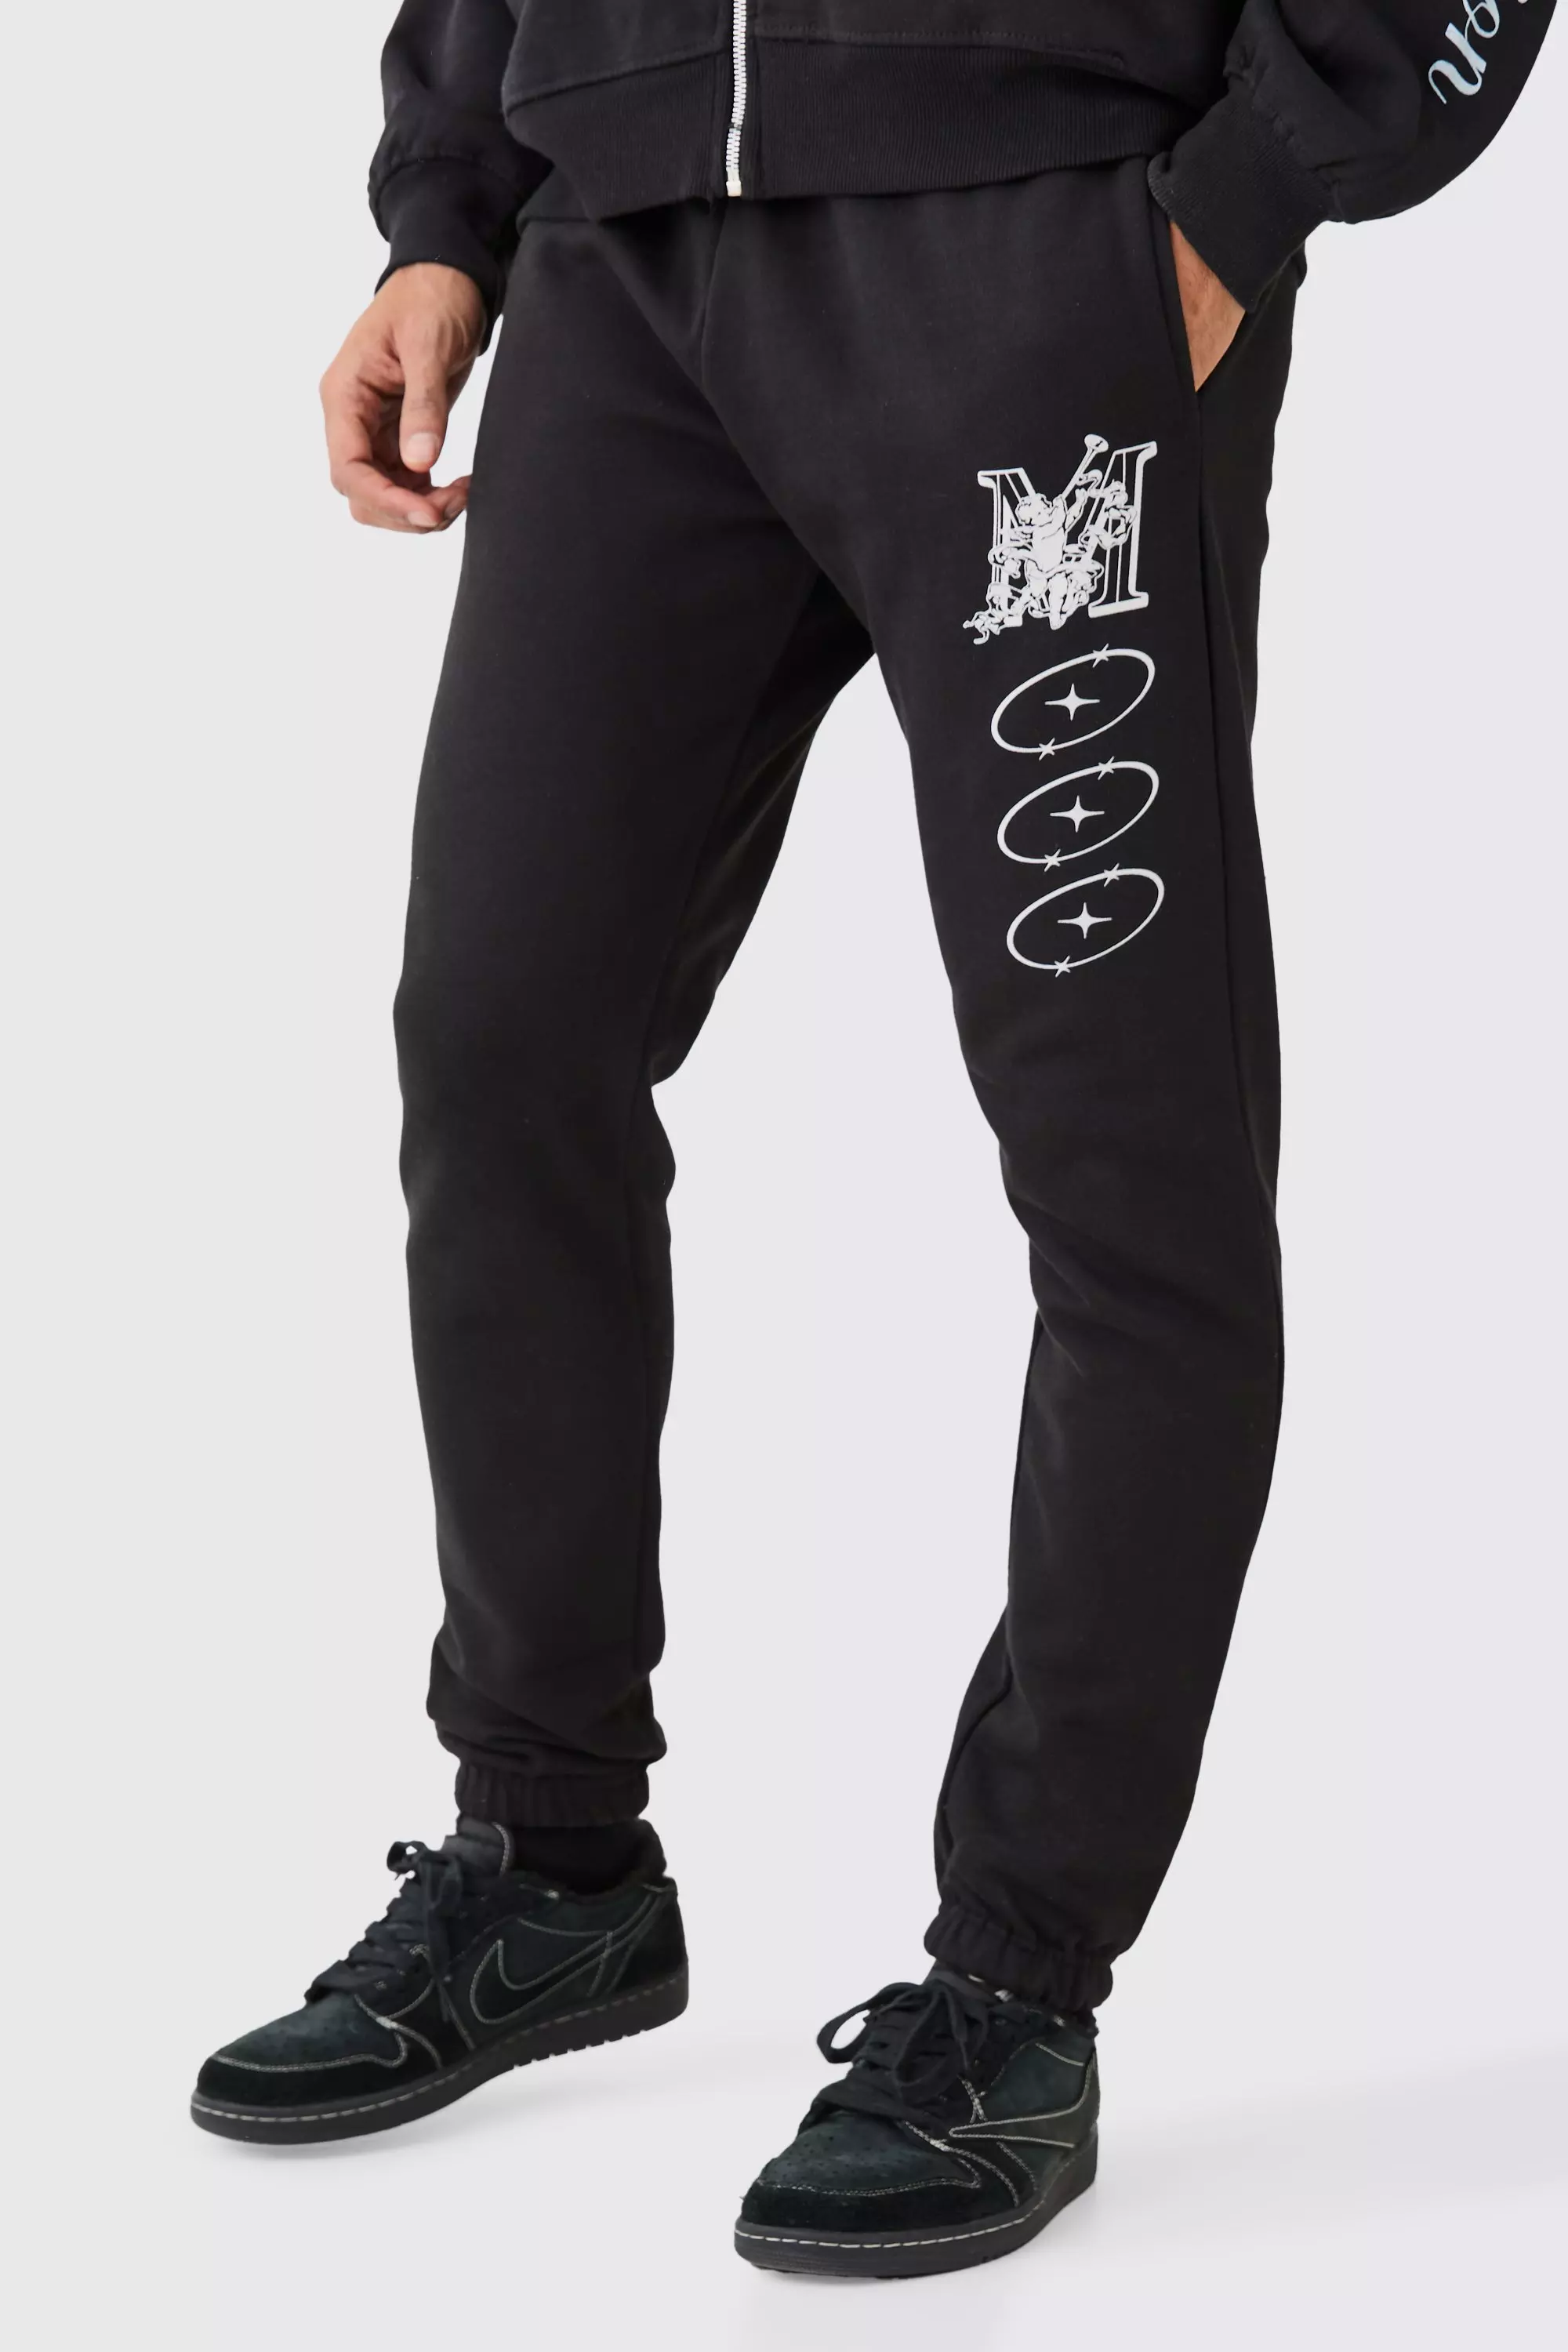 The My Way Jogger Set – Allen James Clothing